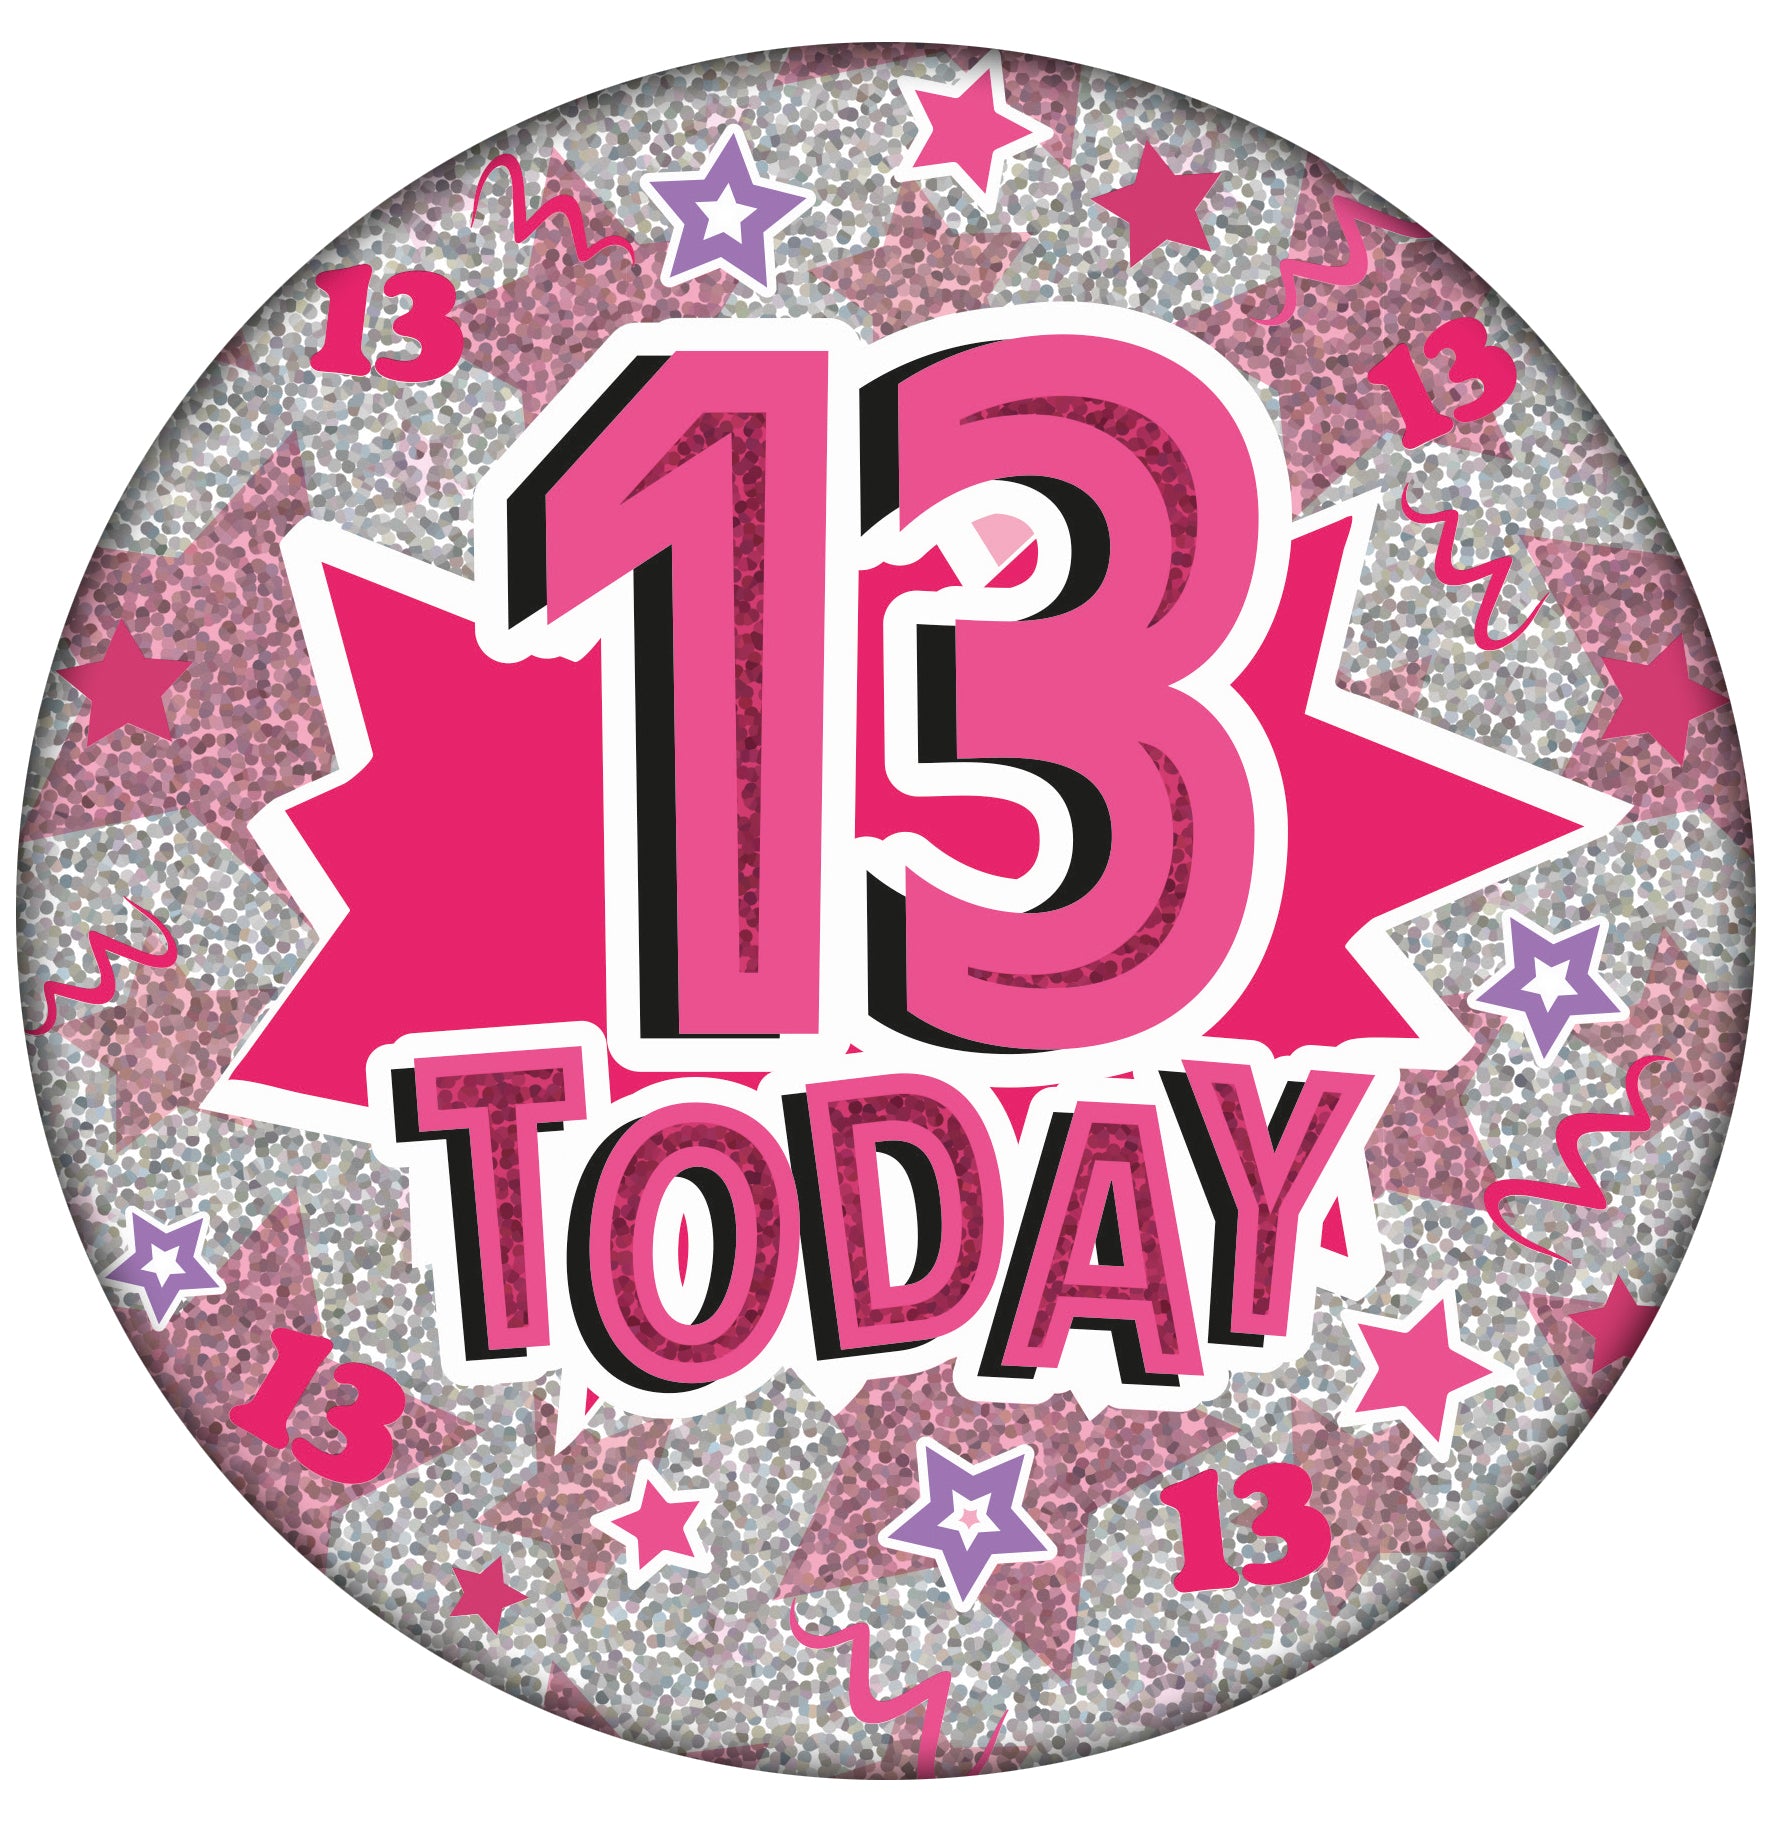 13 Today Pink Holographic Star Badge